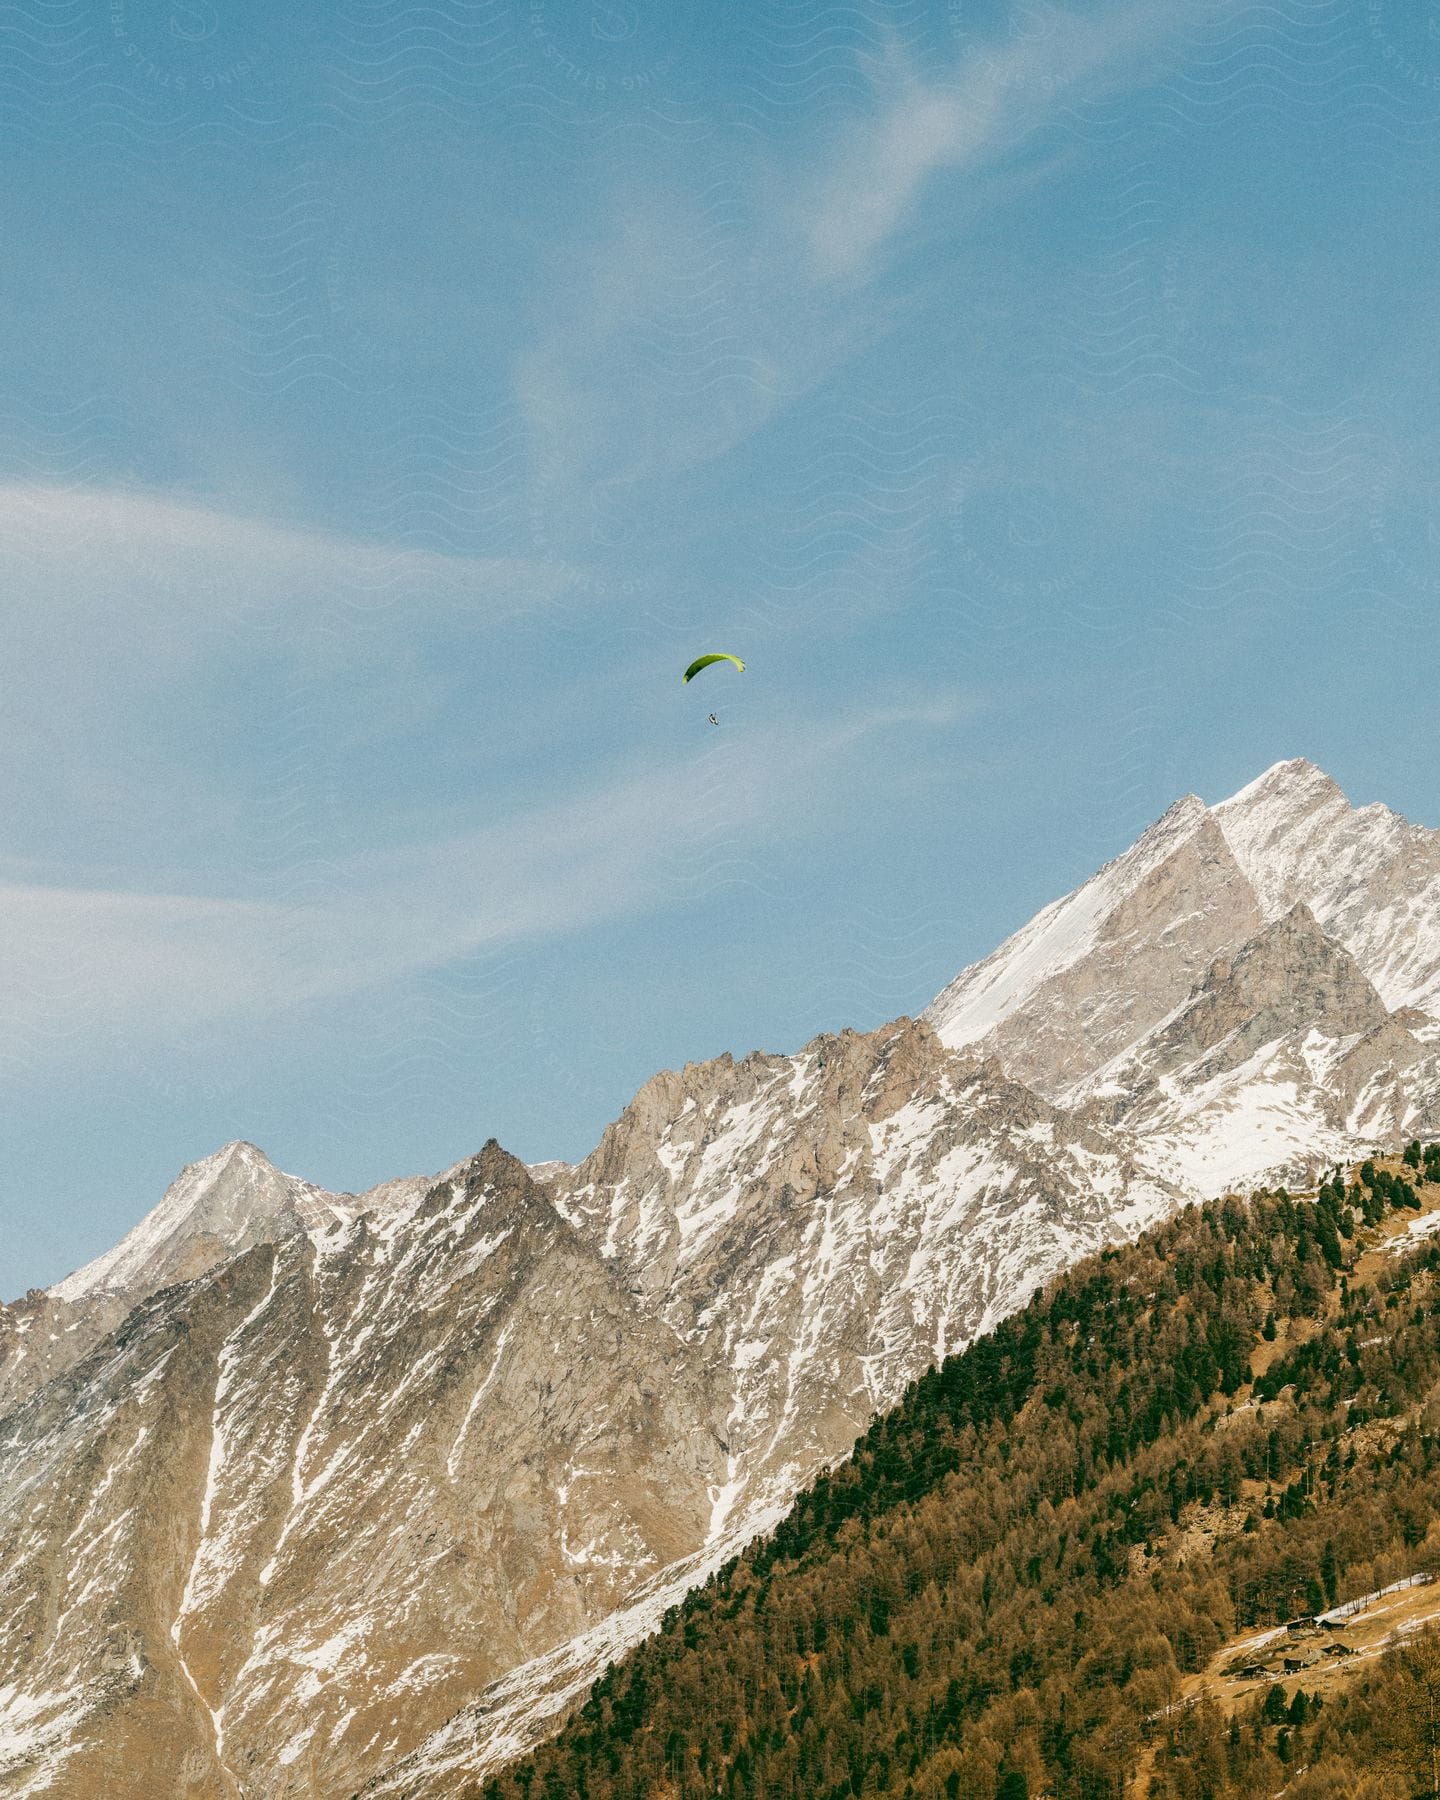 Natural scenery of mountains with snow and vegetation and a person with a parachute in the blue sky